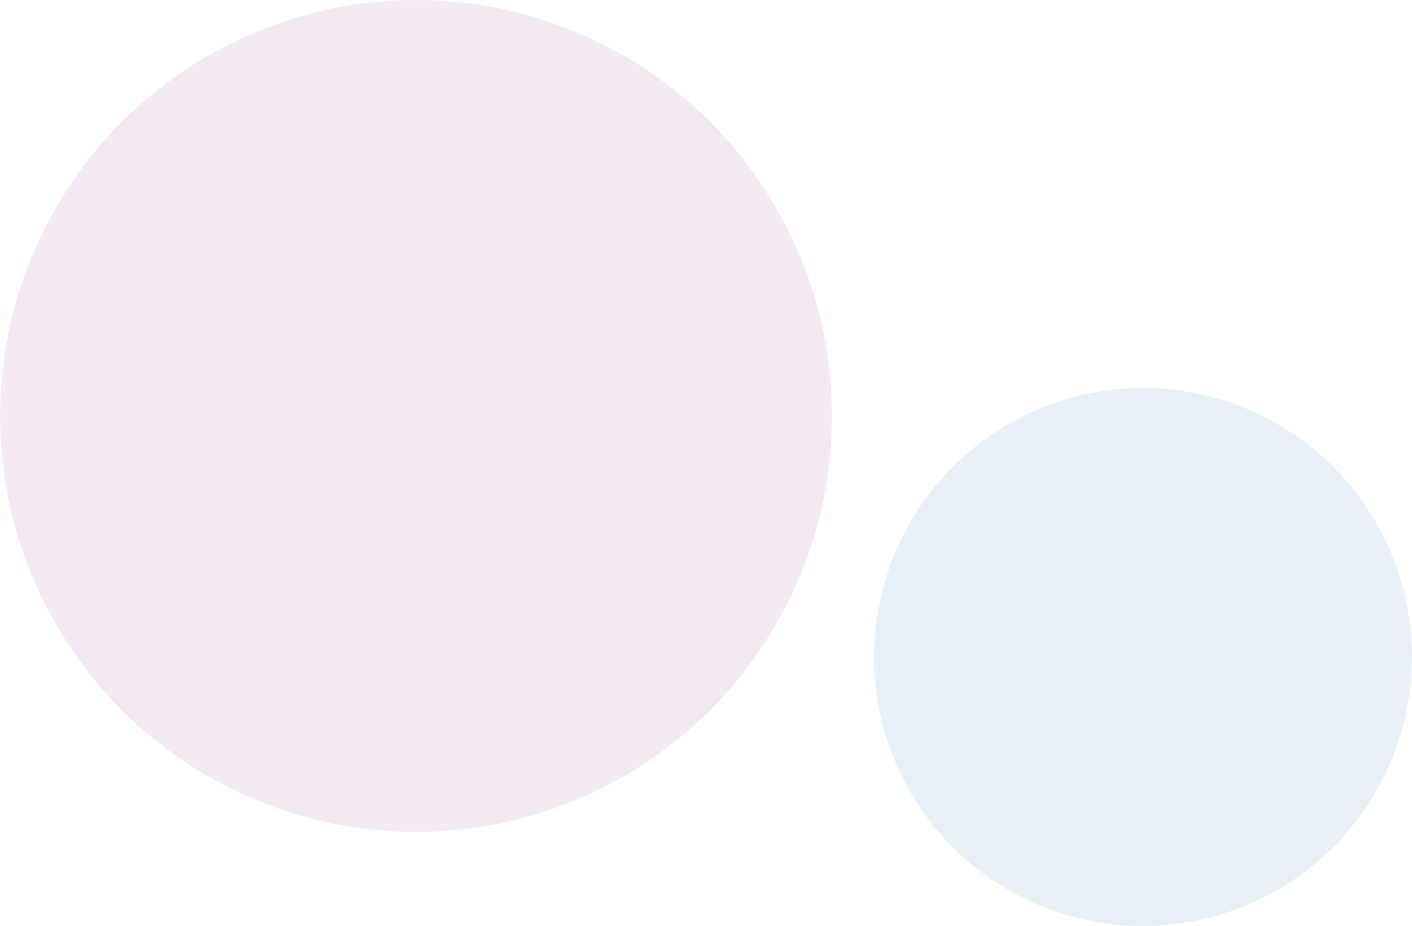 Slightly Opaque Blue and Purples Circles Background